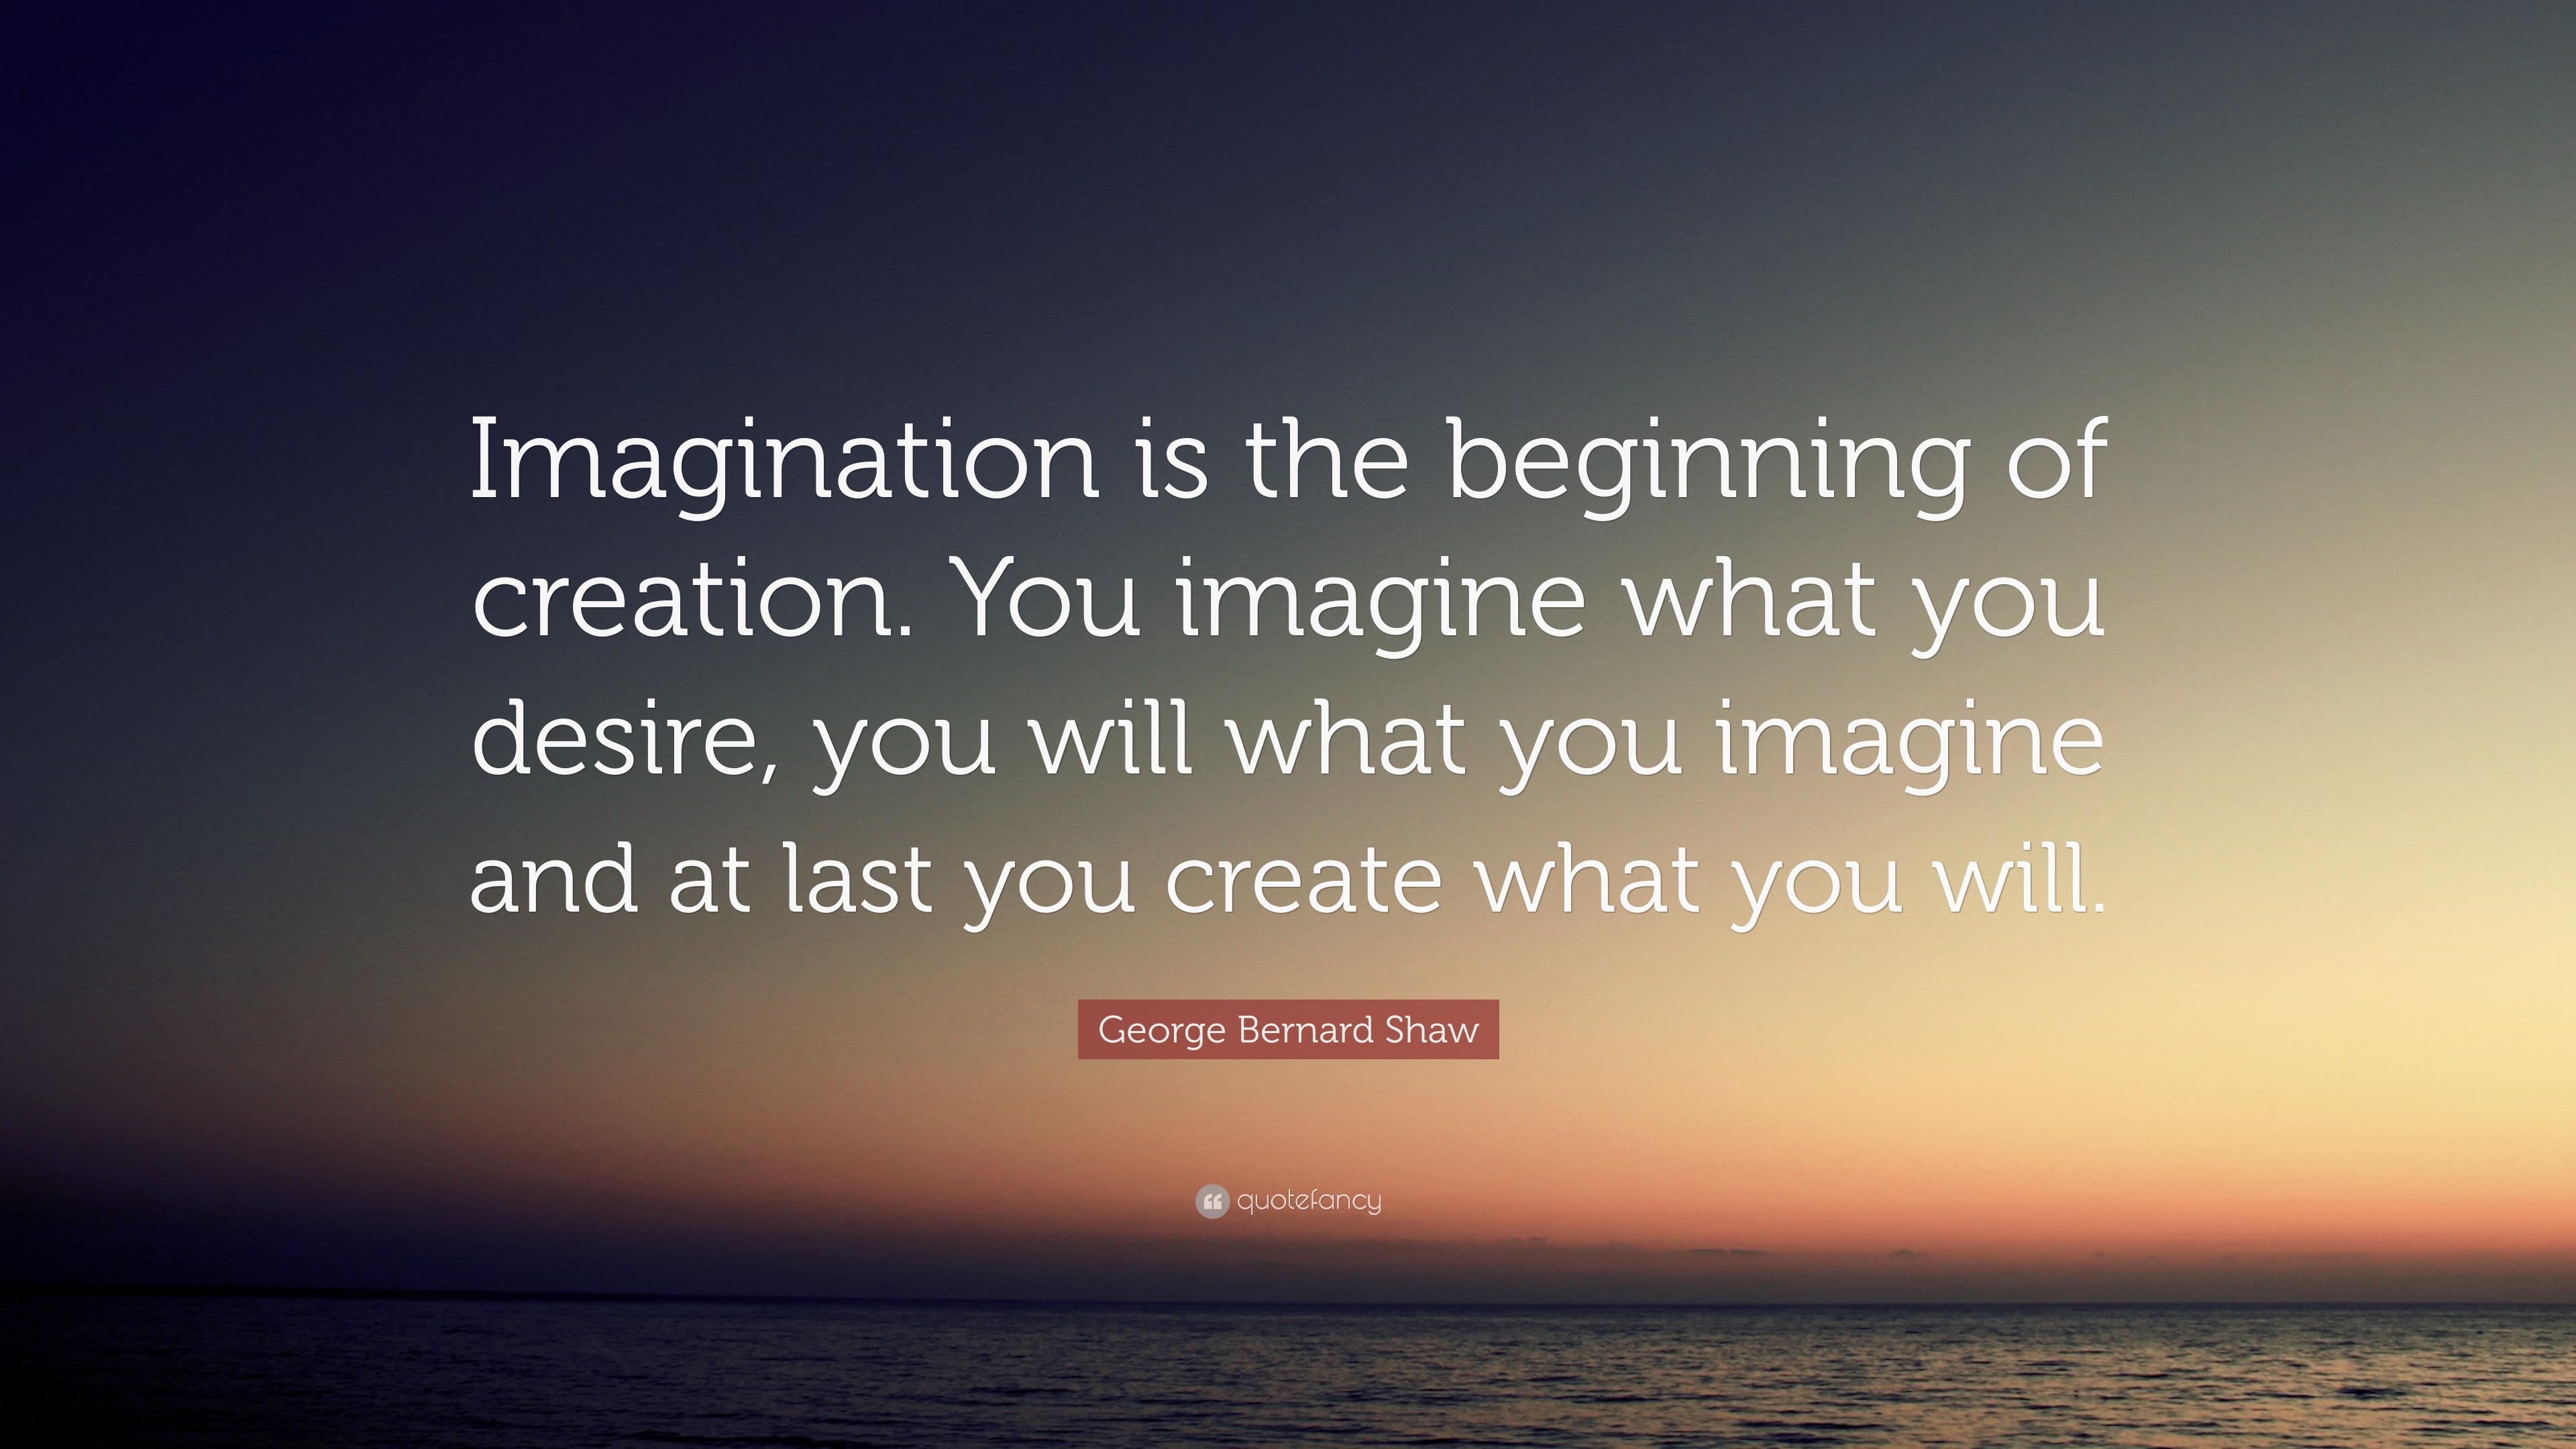 George Bernard Shaw Quote: “Imagination is the beginning of creation ...